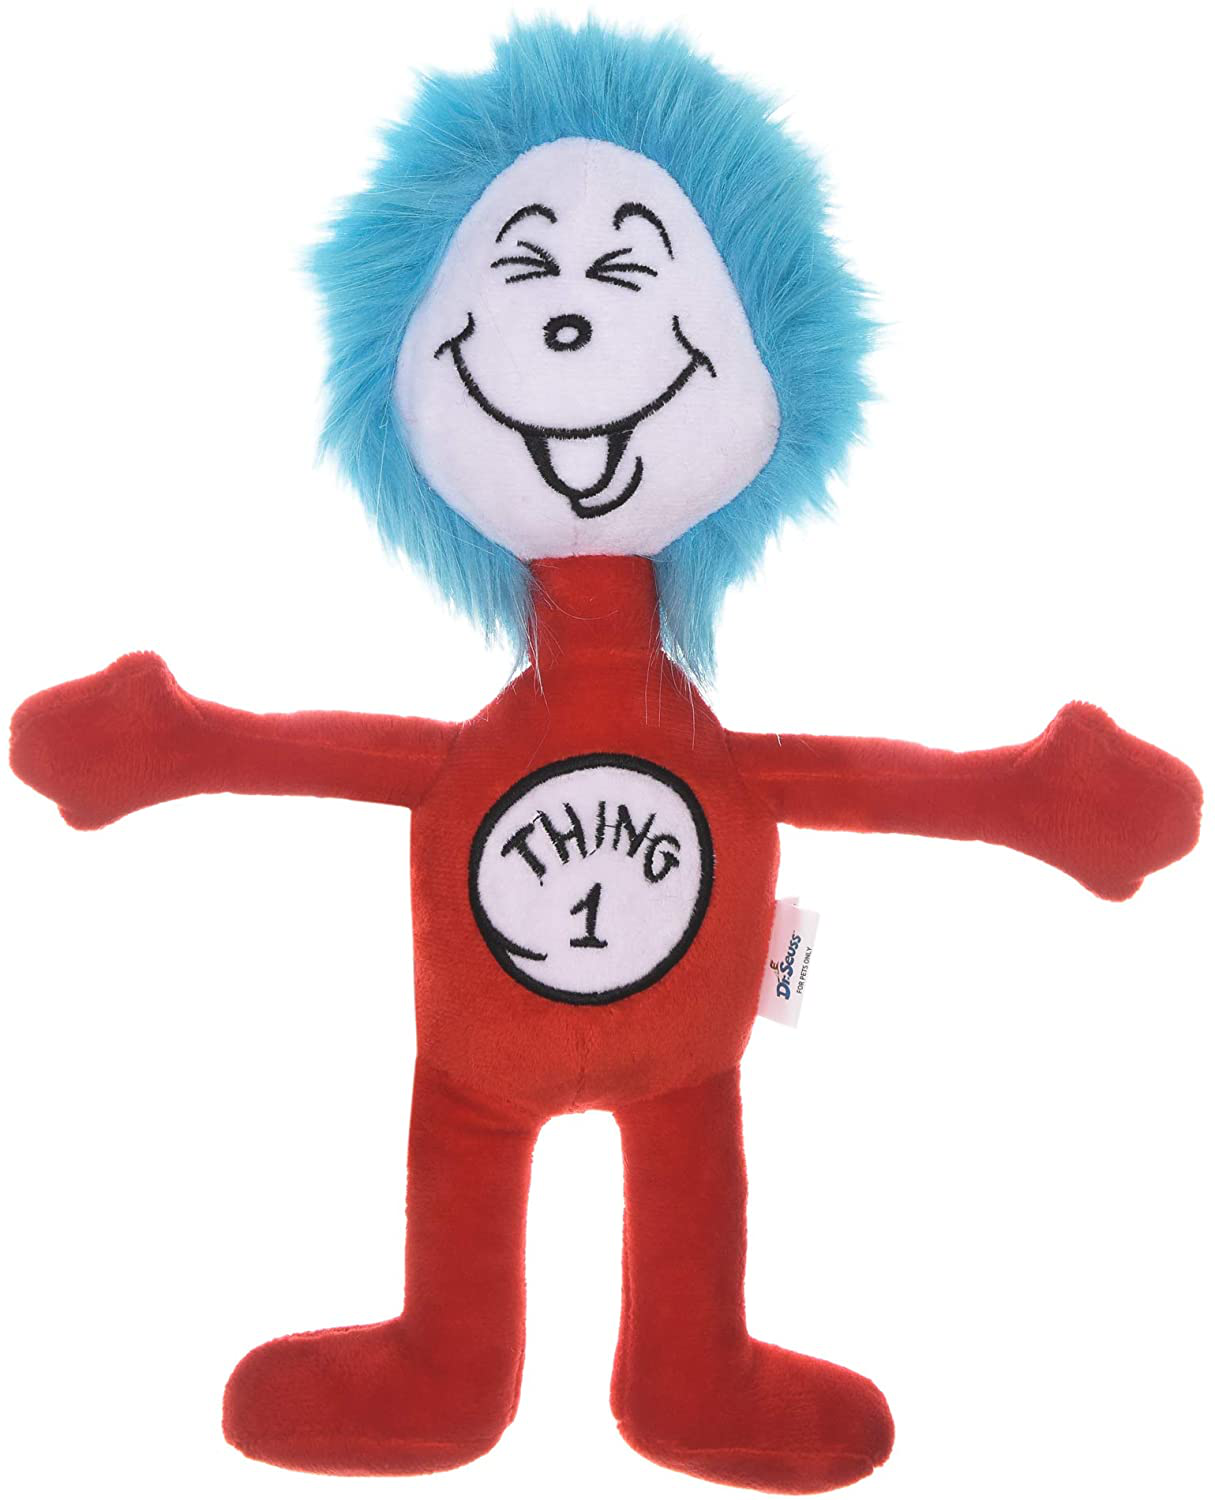 Dr. Seuss the Cat in the Hat Plush Dog Toys - Dog Toy for All Sized Dogs, the Cat in the Hat -Stuffed Animal Dog Toy from Dr. Seuss Collection Available in Multiple Styles Animals & Pet Supplies > Pet Supplies > Dog Supplies > Dog Toys Dr. Seuss for Pets   